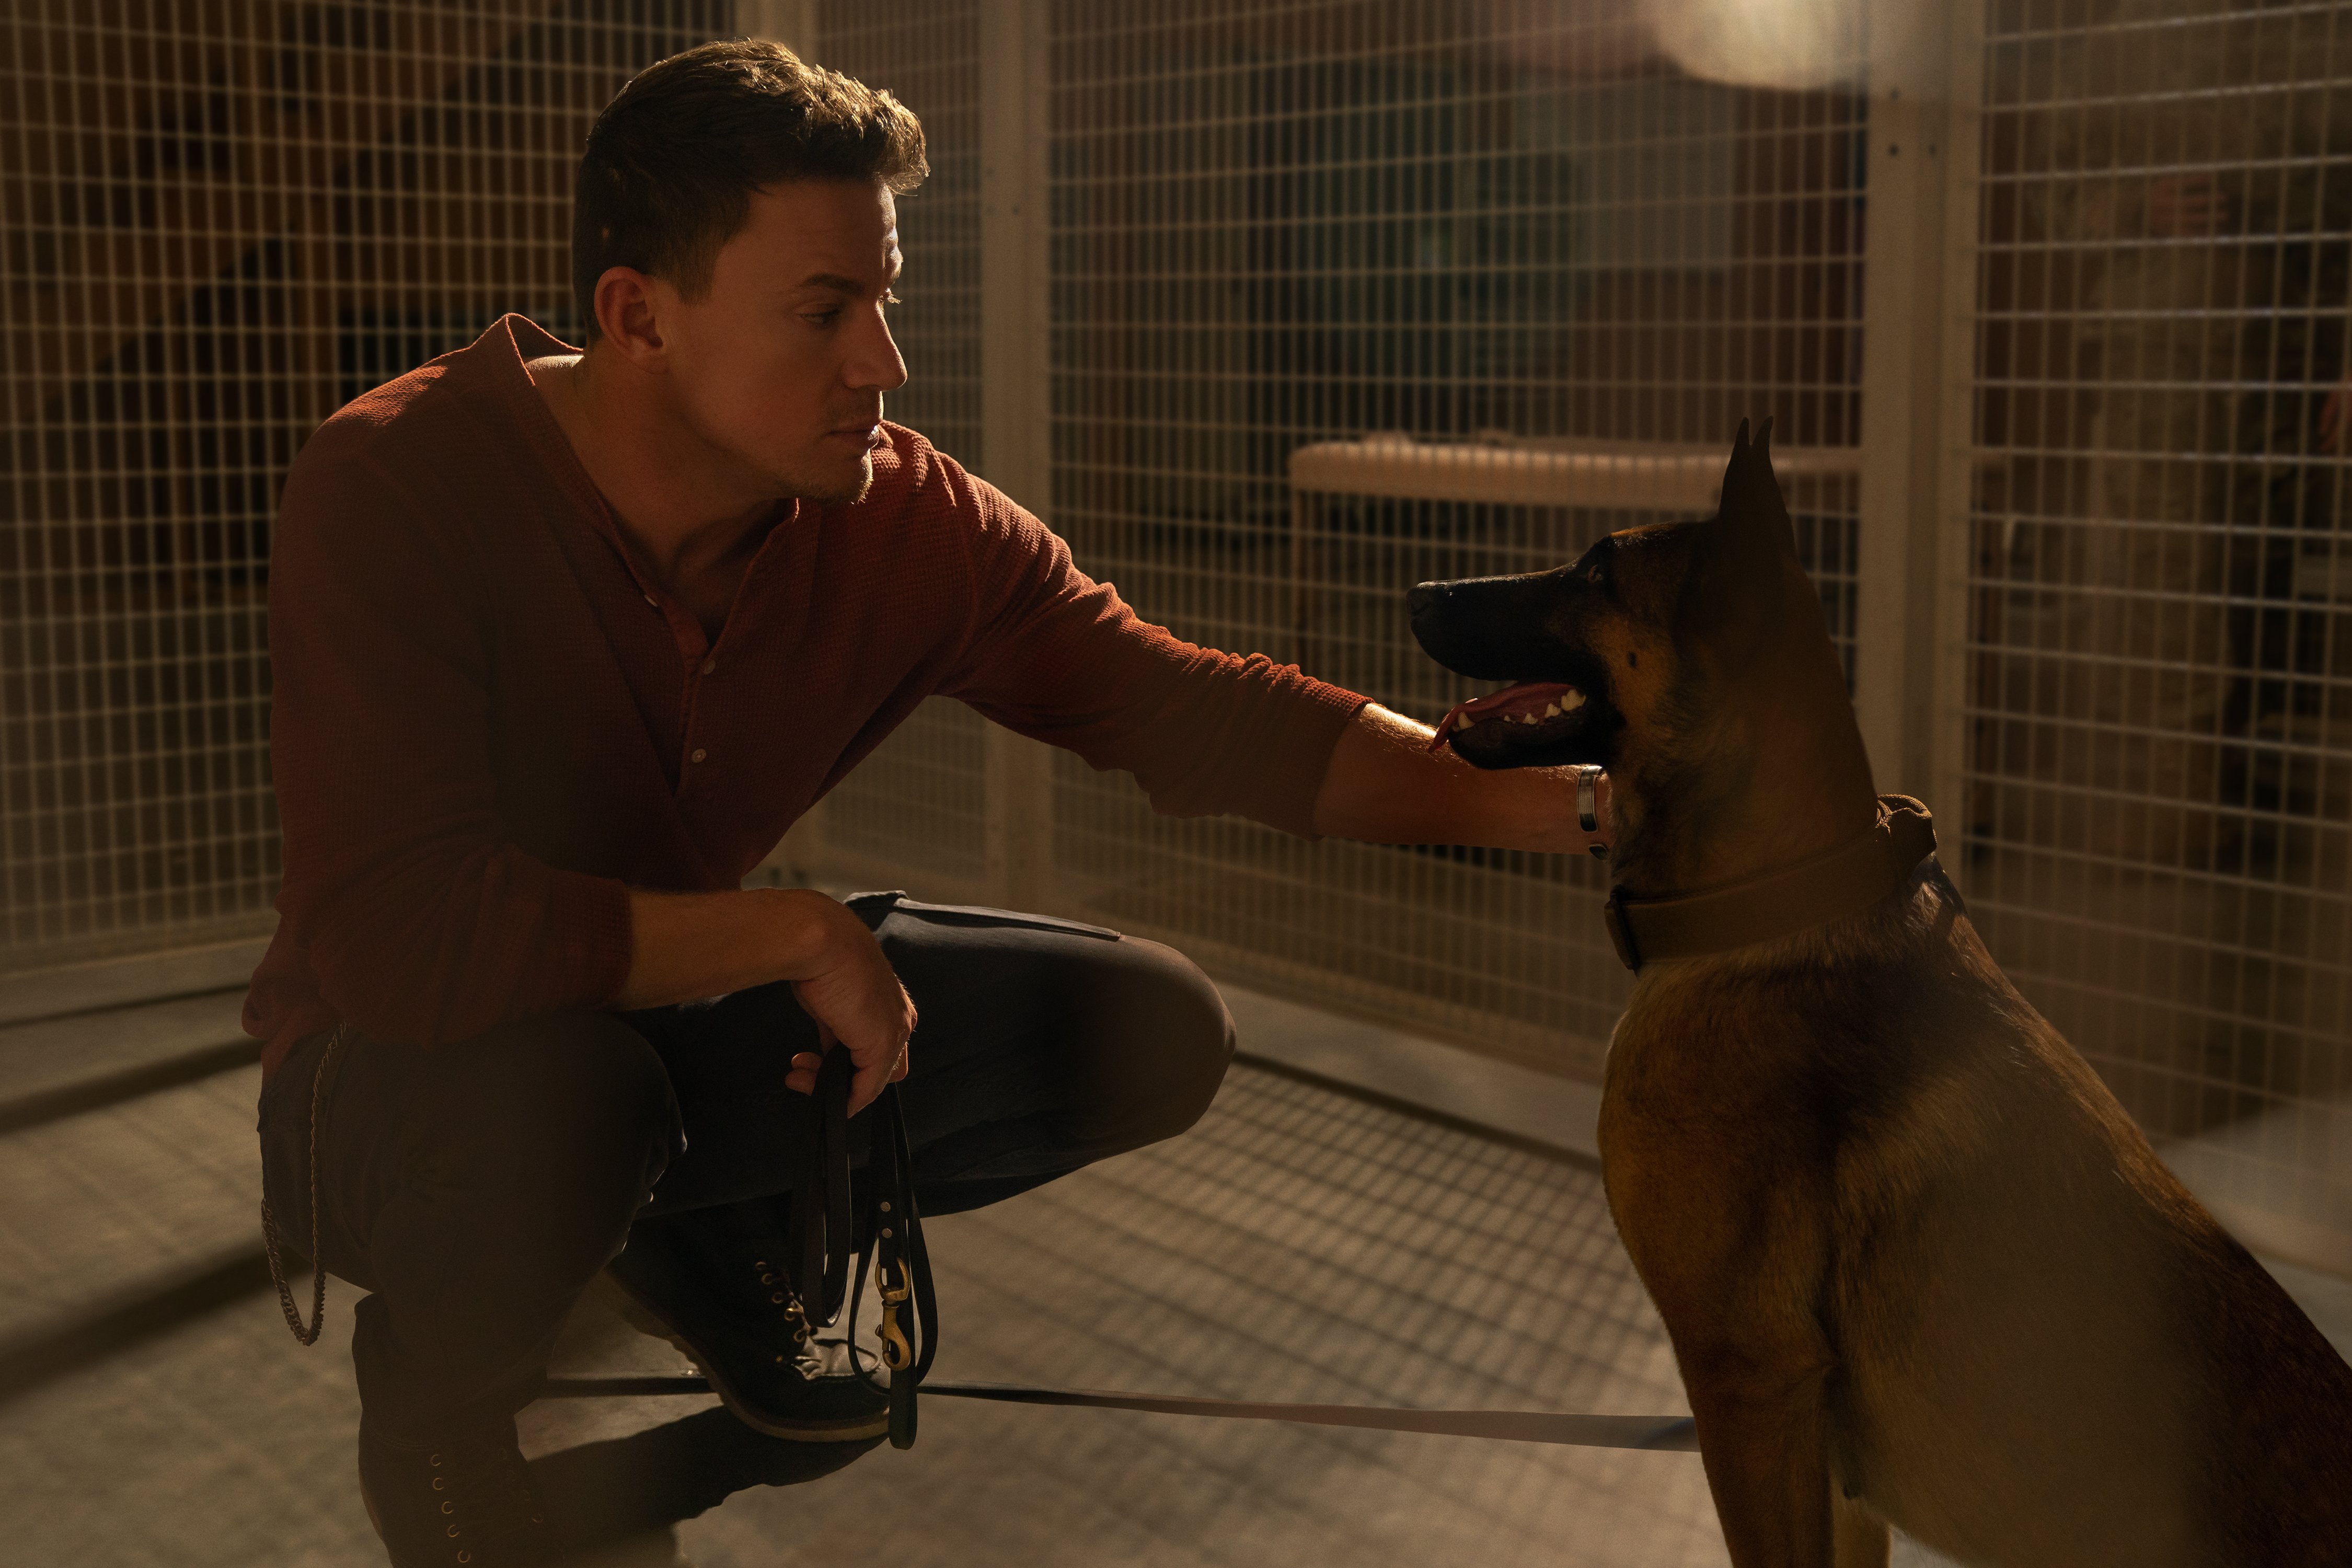 Channing Tatum unleashes a crowd-pleasing brain holiday with new movie Dog  - The Globe and Mail